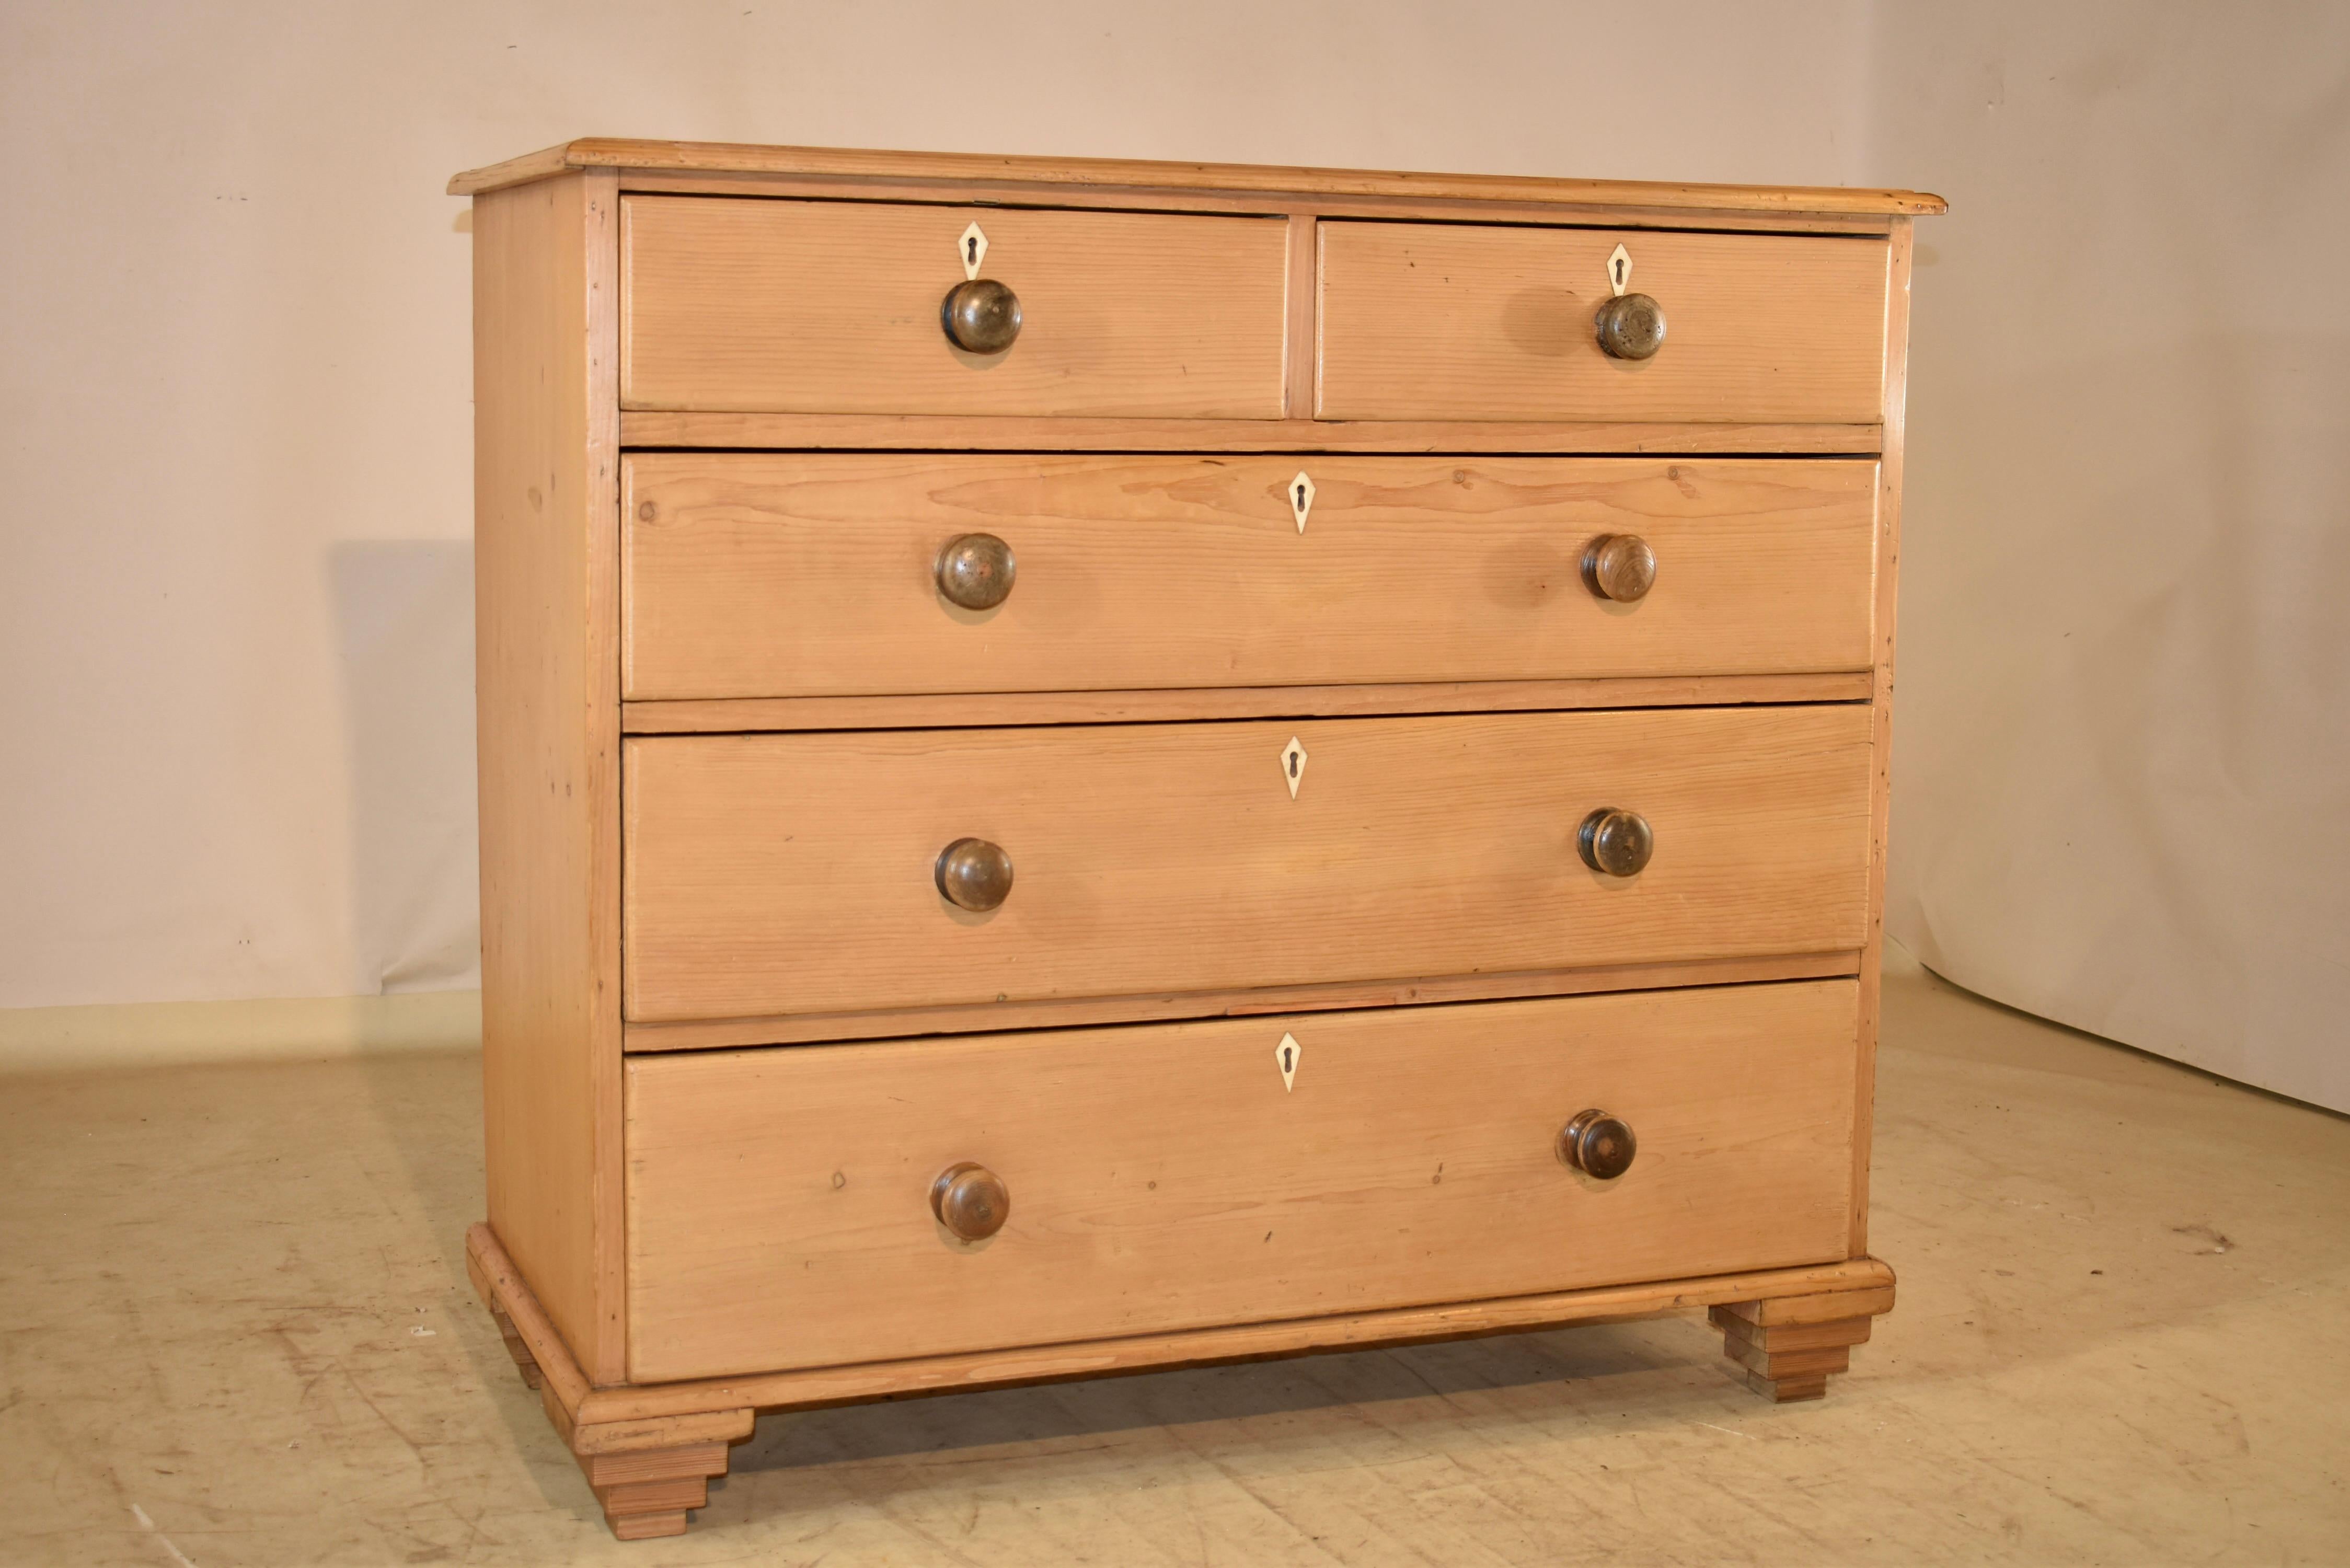 Period Georgian 18th century pine chest of drawers from England.  The top has a beveled edge around a single plank top, following down to single plank sides as well.  The front of the case has two drawers over three drawer configuration, all with